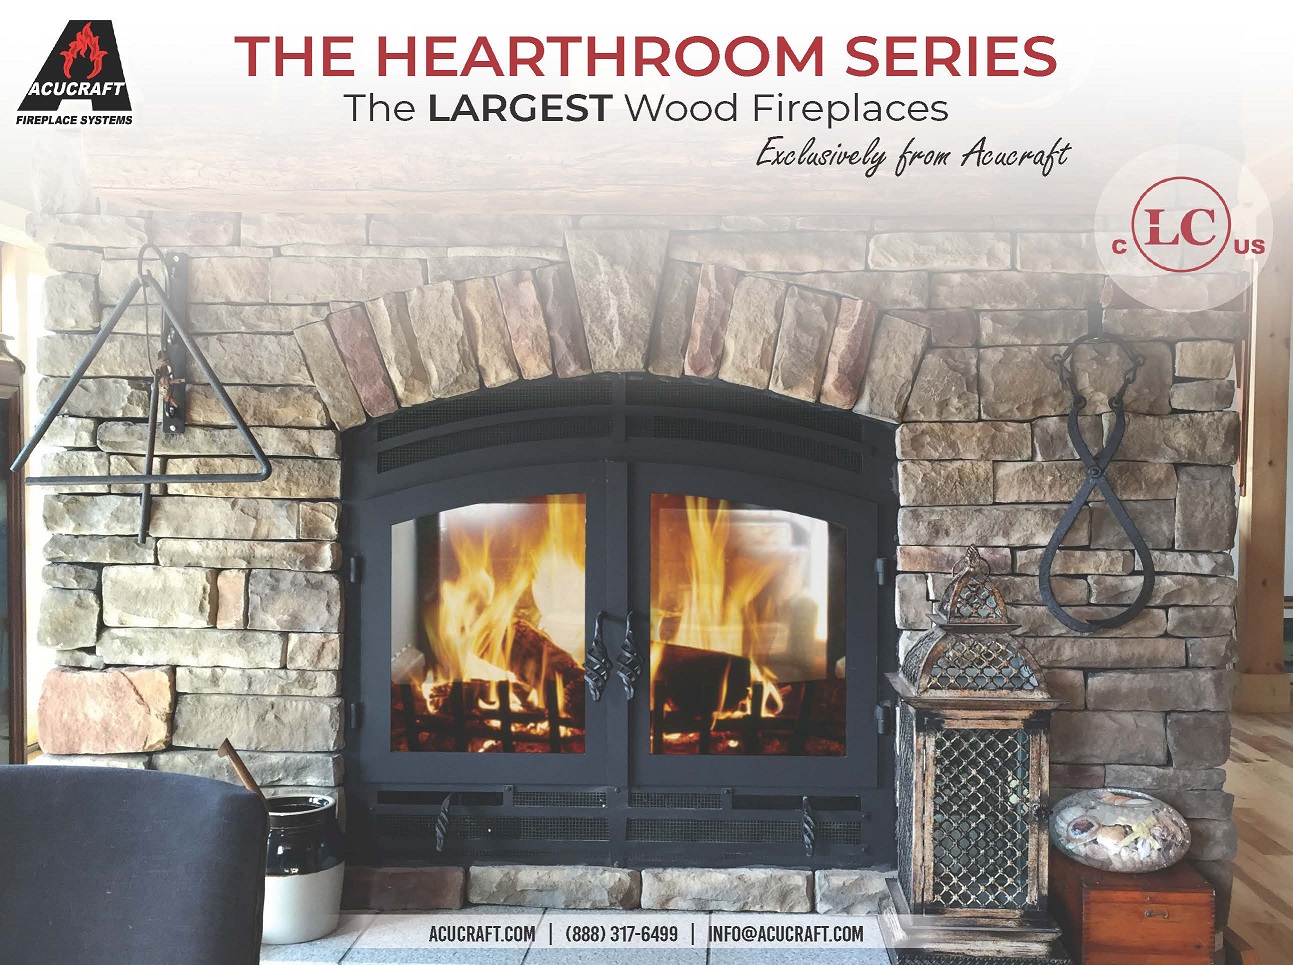 Request a Copy of the New Acucraft Hearthroom Wood Burning Fireplace Brochure Today!